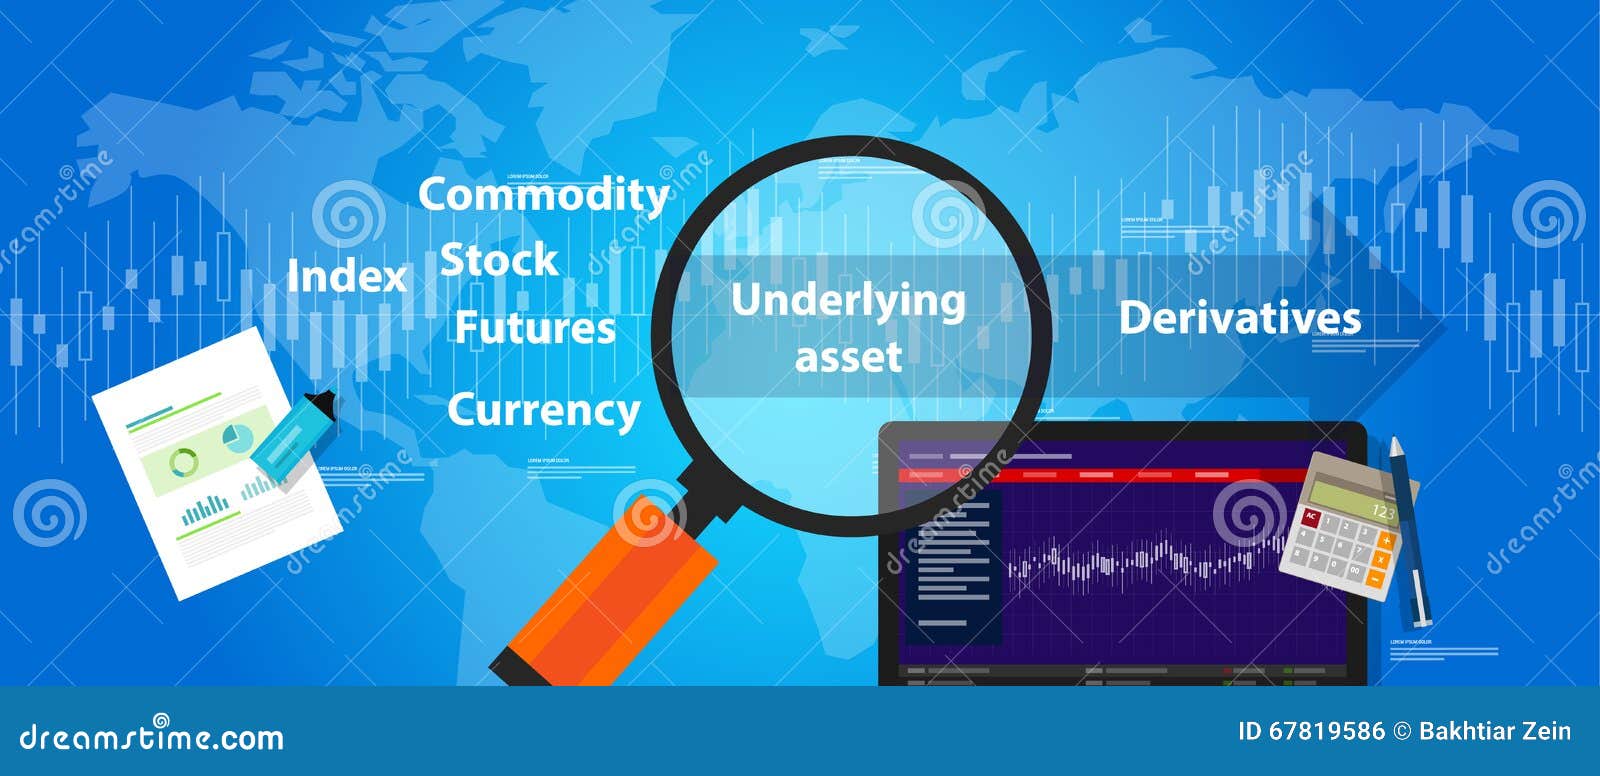 underlying assets derivative trading stocks index future commodity futures currency market pricing value